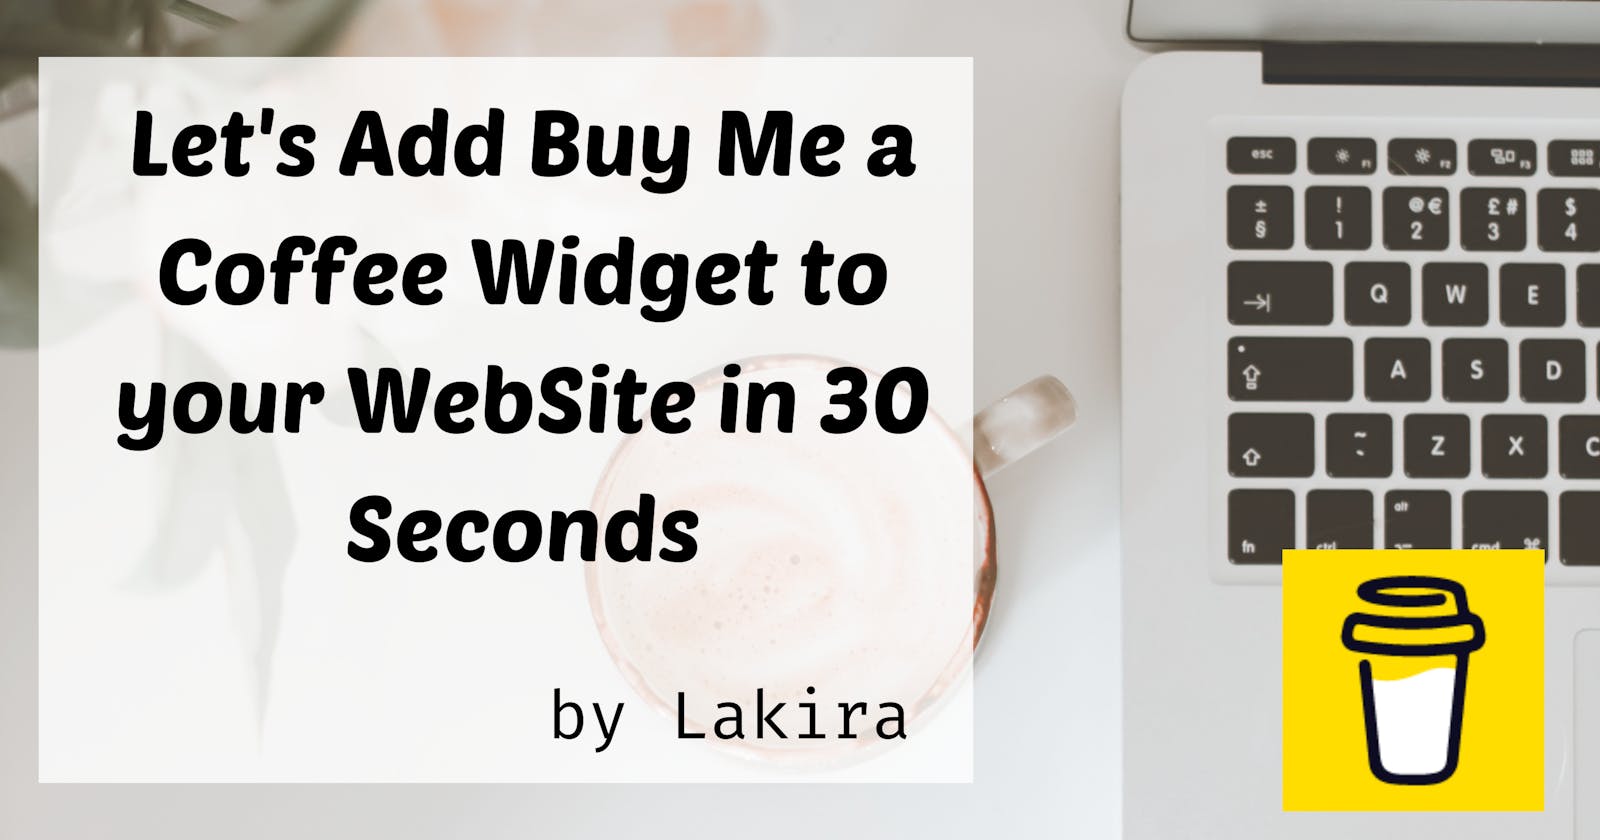 Let's Add Buy Me a Coffee Widget to your WebSite in 30 Seconds